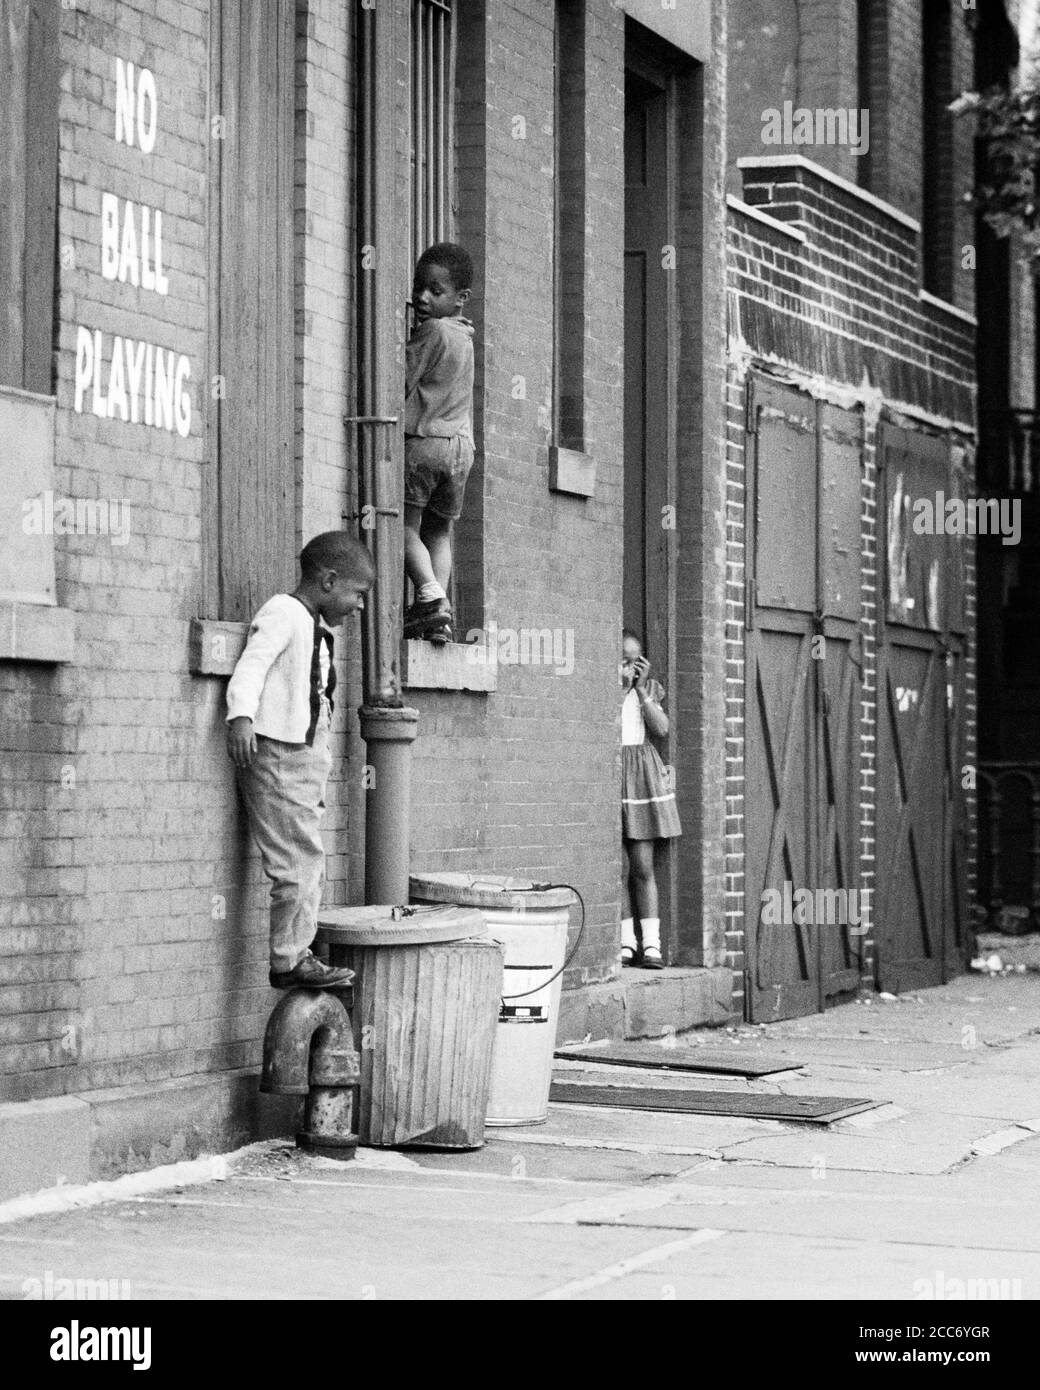 1970s THREE ANONYMOUS YOUNG AFRICAN-AMERICAN CHILDREN PLAYING HIDE AND SEEK ON CITY STREET WITH NO BALL PLAYING WRITTEN ON WALL - w5854 HAR001 HARS URBAN DEPRESSION SIDEWALK DOORWAY EXPRESSION OLD TIME BUSY SURPRISE NOSTALGIA BROTHER TAG OLD FASHION SISTER POVERTY 1 JUVENILE FACIAL SAFETY COMPETITION WORRY LIFESTYLE BRICK FEMALES BROTHERS MOODY POOR HEALTHINESS HOME LIFE COPY SPACE FRIENDSHIP FULL-LENGTH CANS MALES RISK SIBLINGS SISTERS EXPRESSIONS TROUBLED B&W CONCERNED SADNESS MEAN WELLNESS TRASH ADVENTURE DISCOVERY HIDE STREETS WELFARE AFRICAN-AMERICANS AFRICAN-AMERICAN AND CHOICE Stock Photo